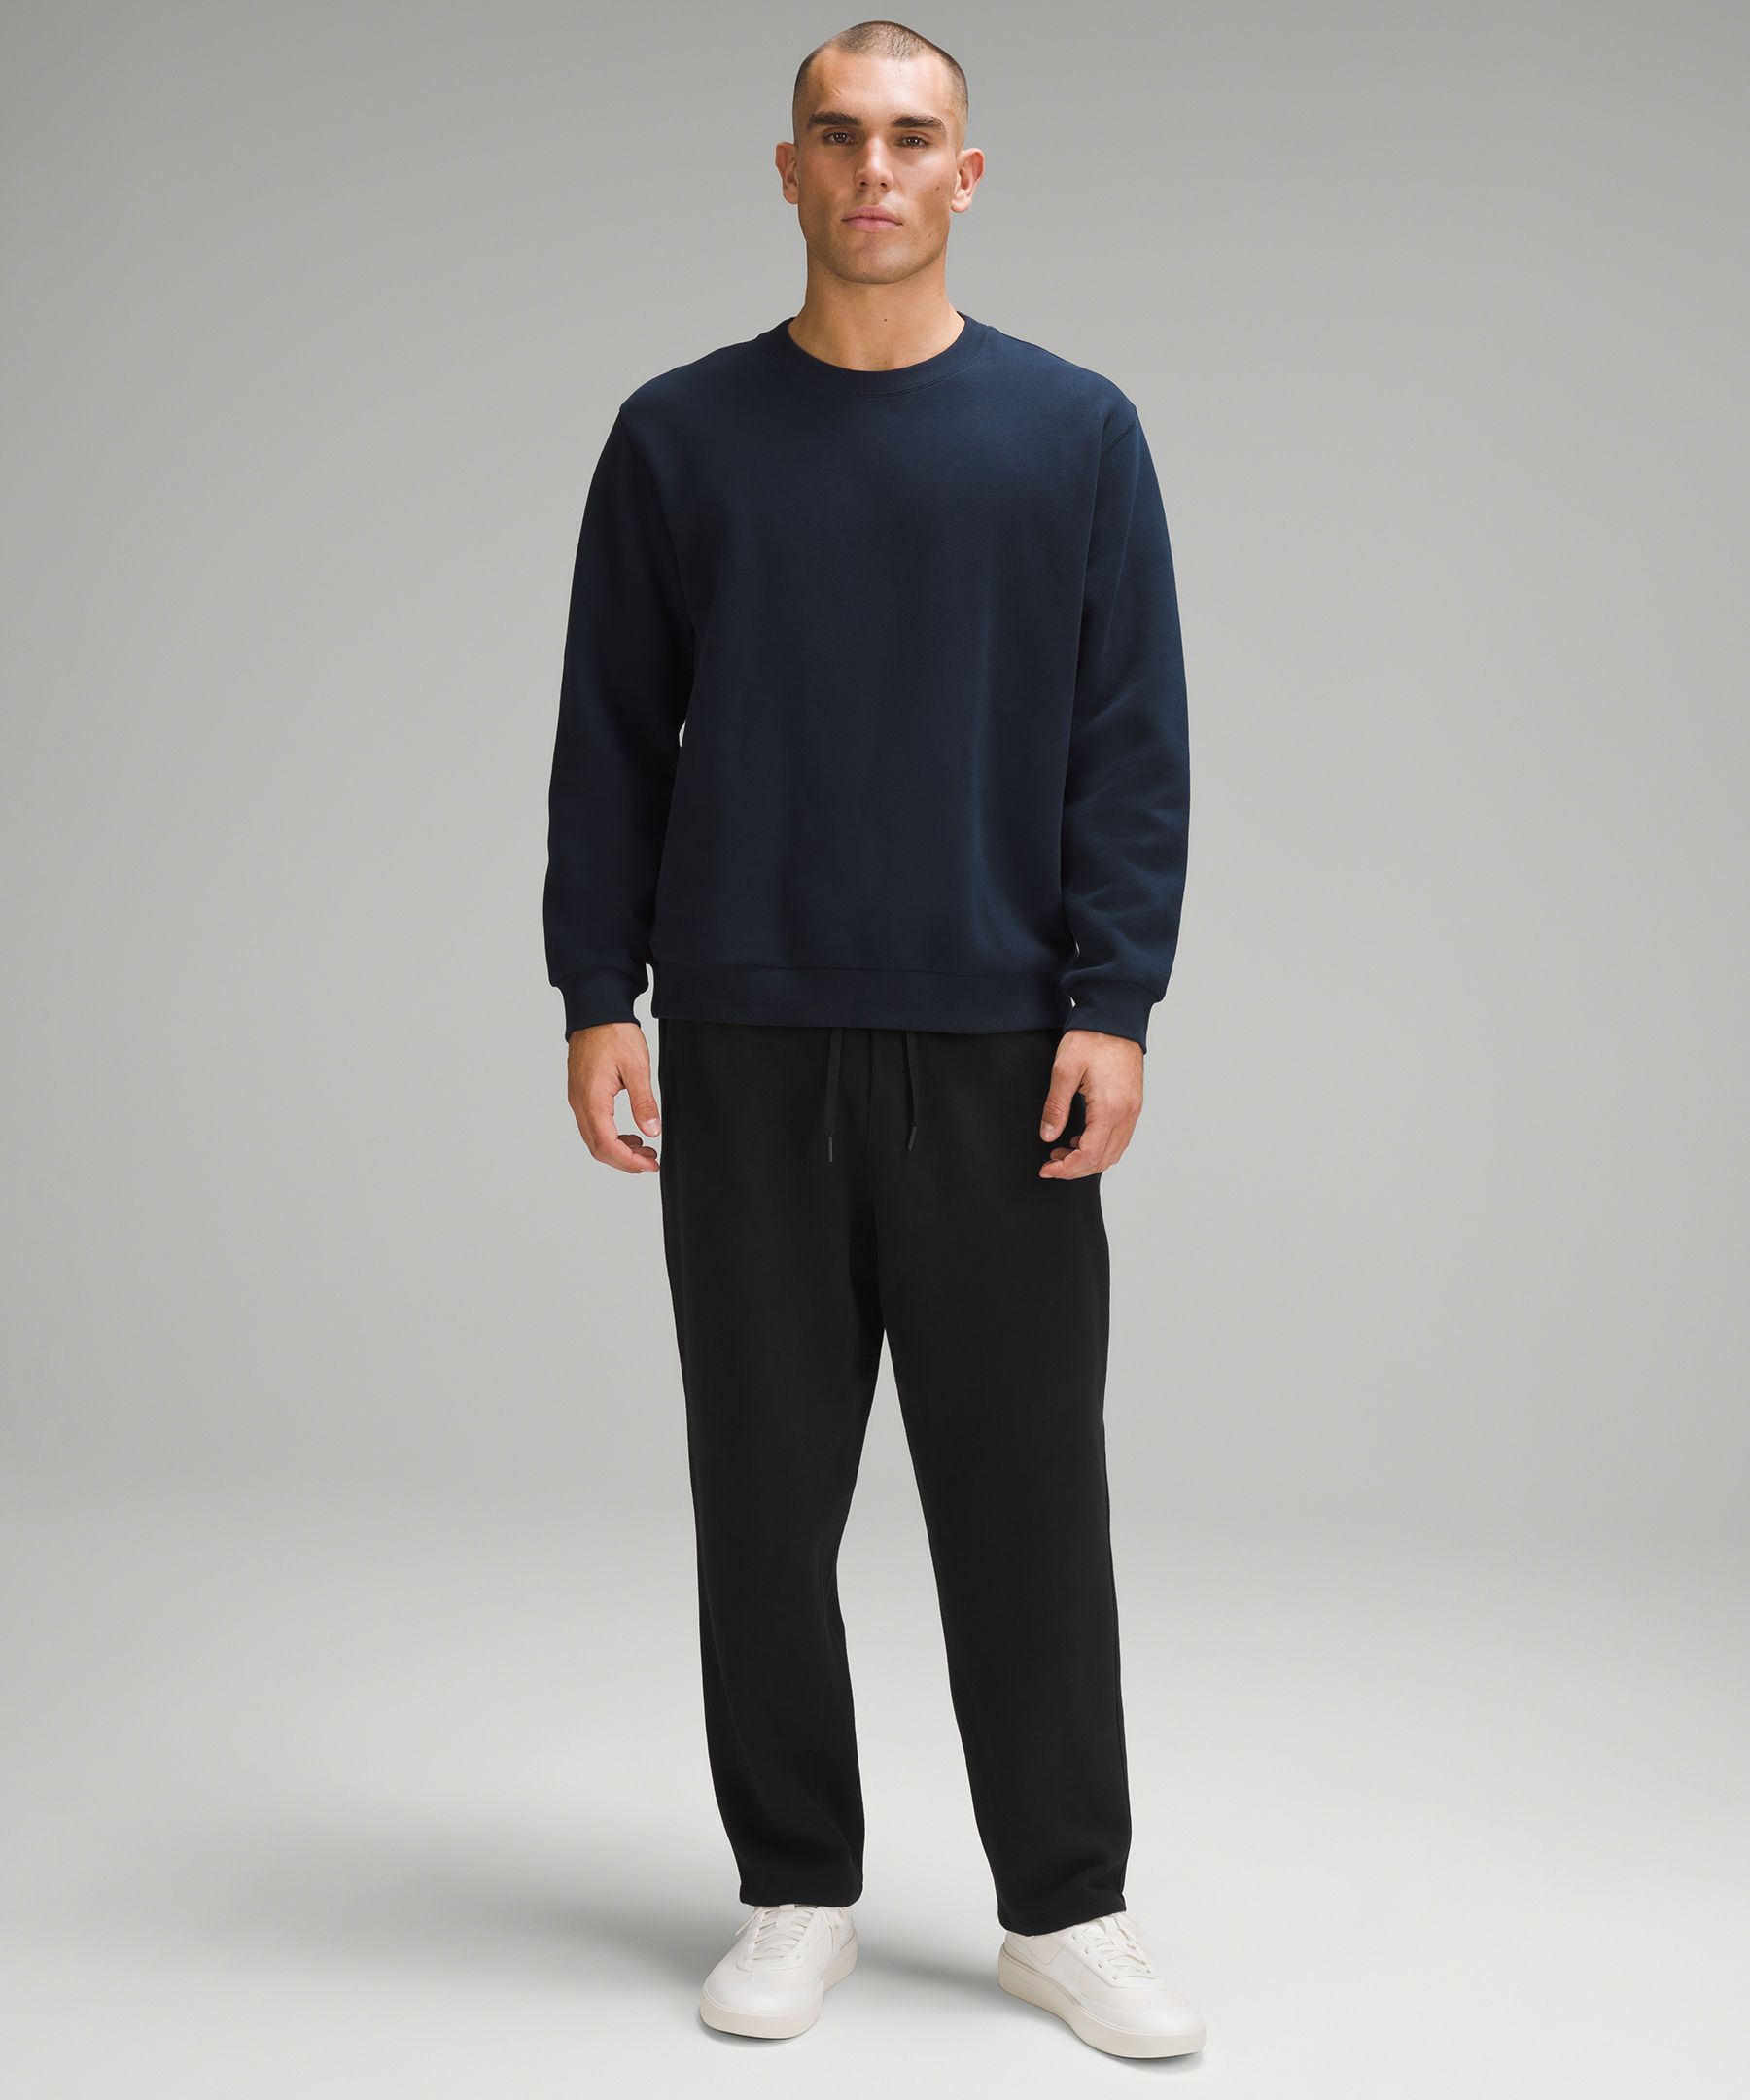 Steady State Pant *Tall, Men's Joggers